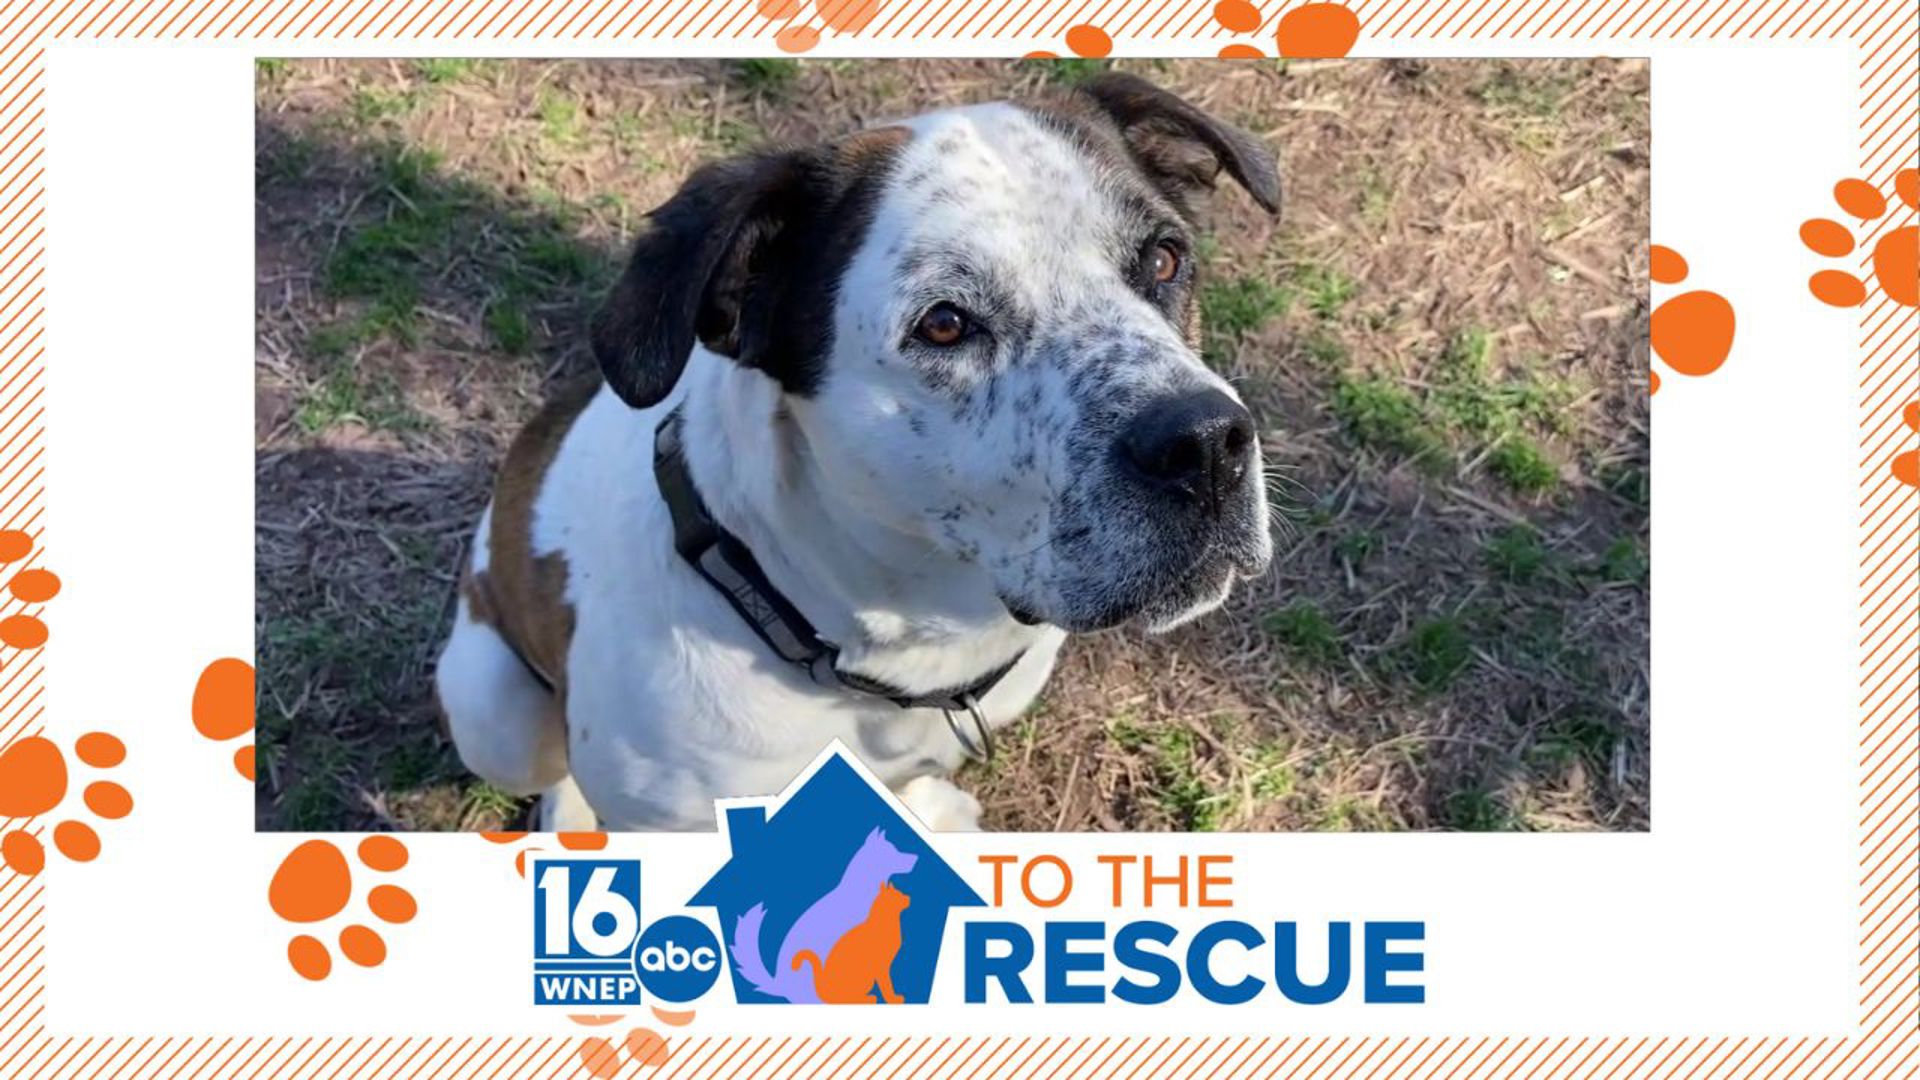 In this week's 16 To The Rescue, we meet a cattle dog mix who came to live at an animal shelter near Honesdale after his previous owner got too sick to care for him.